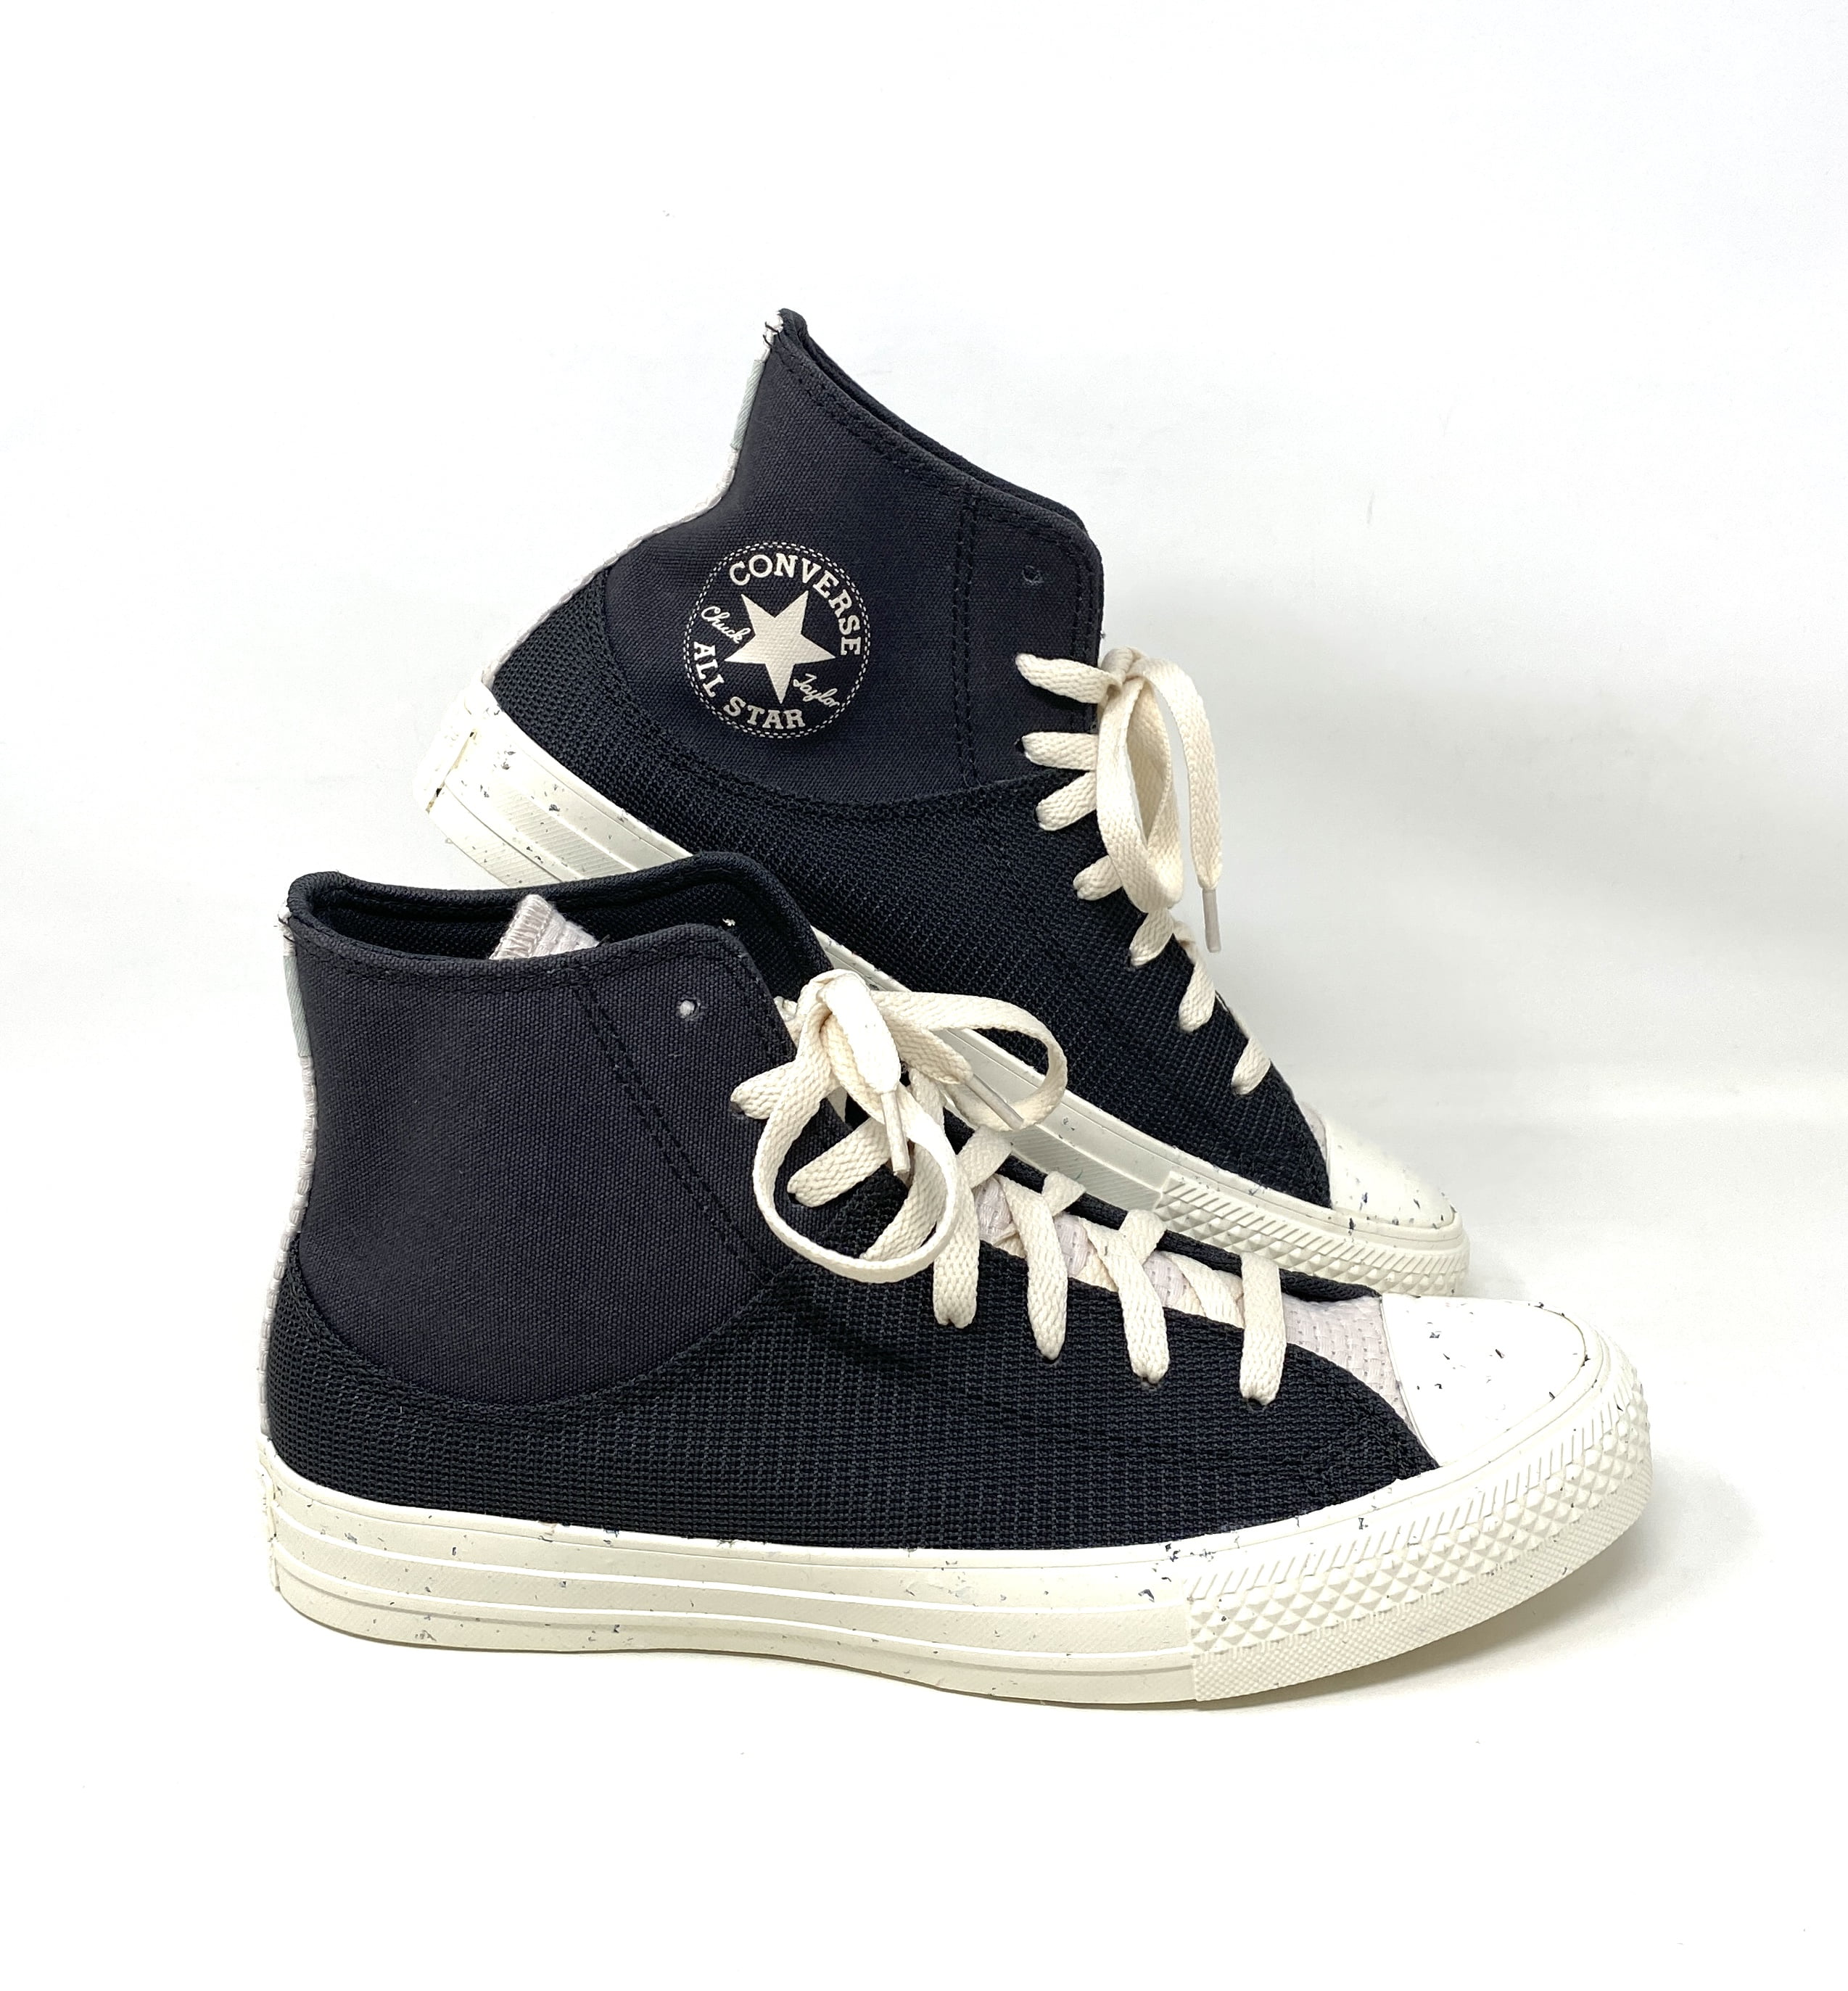 Converse Chuck Taylor All Star Ideal Craft High Top Canvas Black Shoes ...